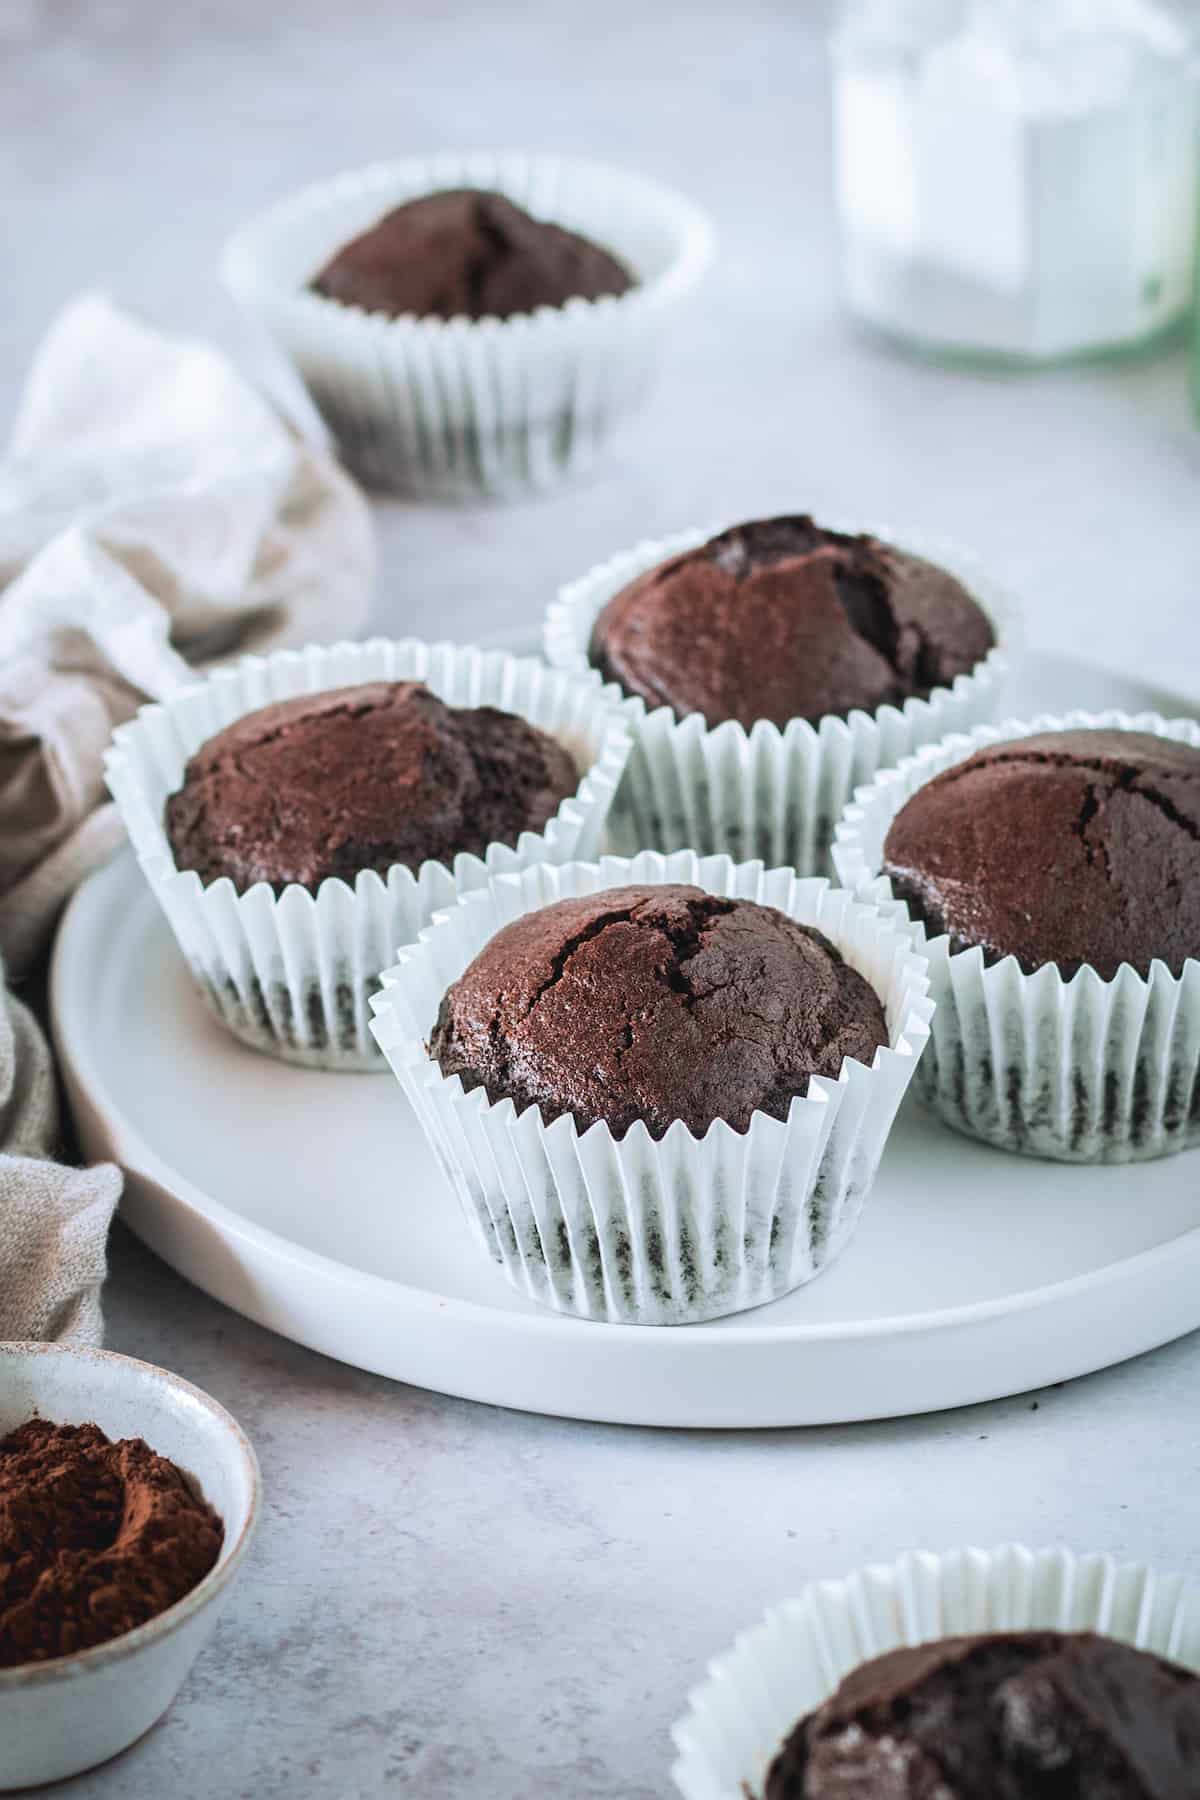 Four Lined, Unfrosted Chocolate Cupcakes on a Round Plate